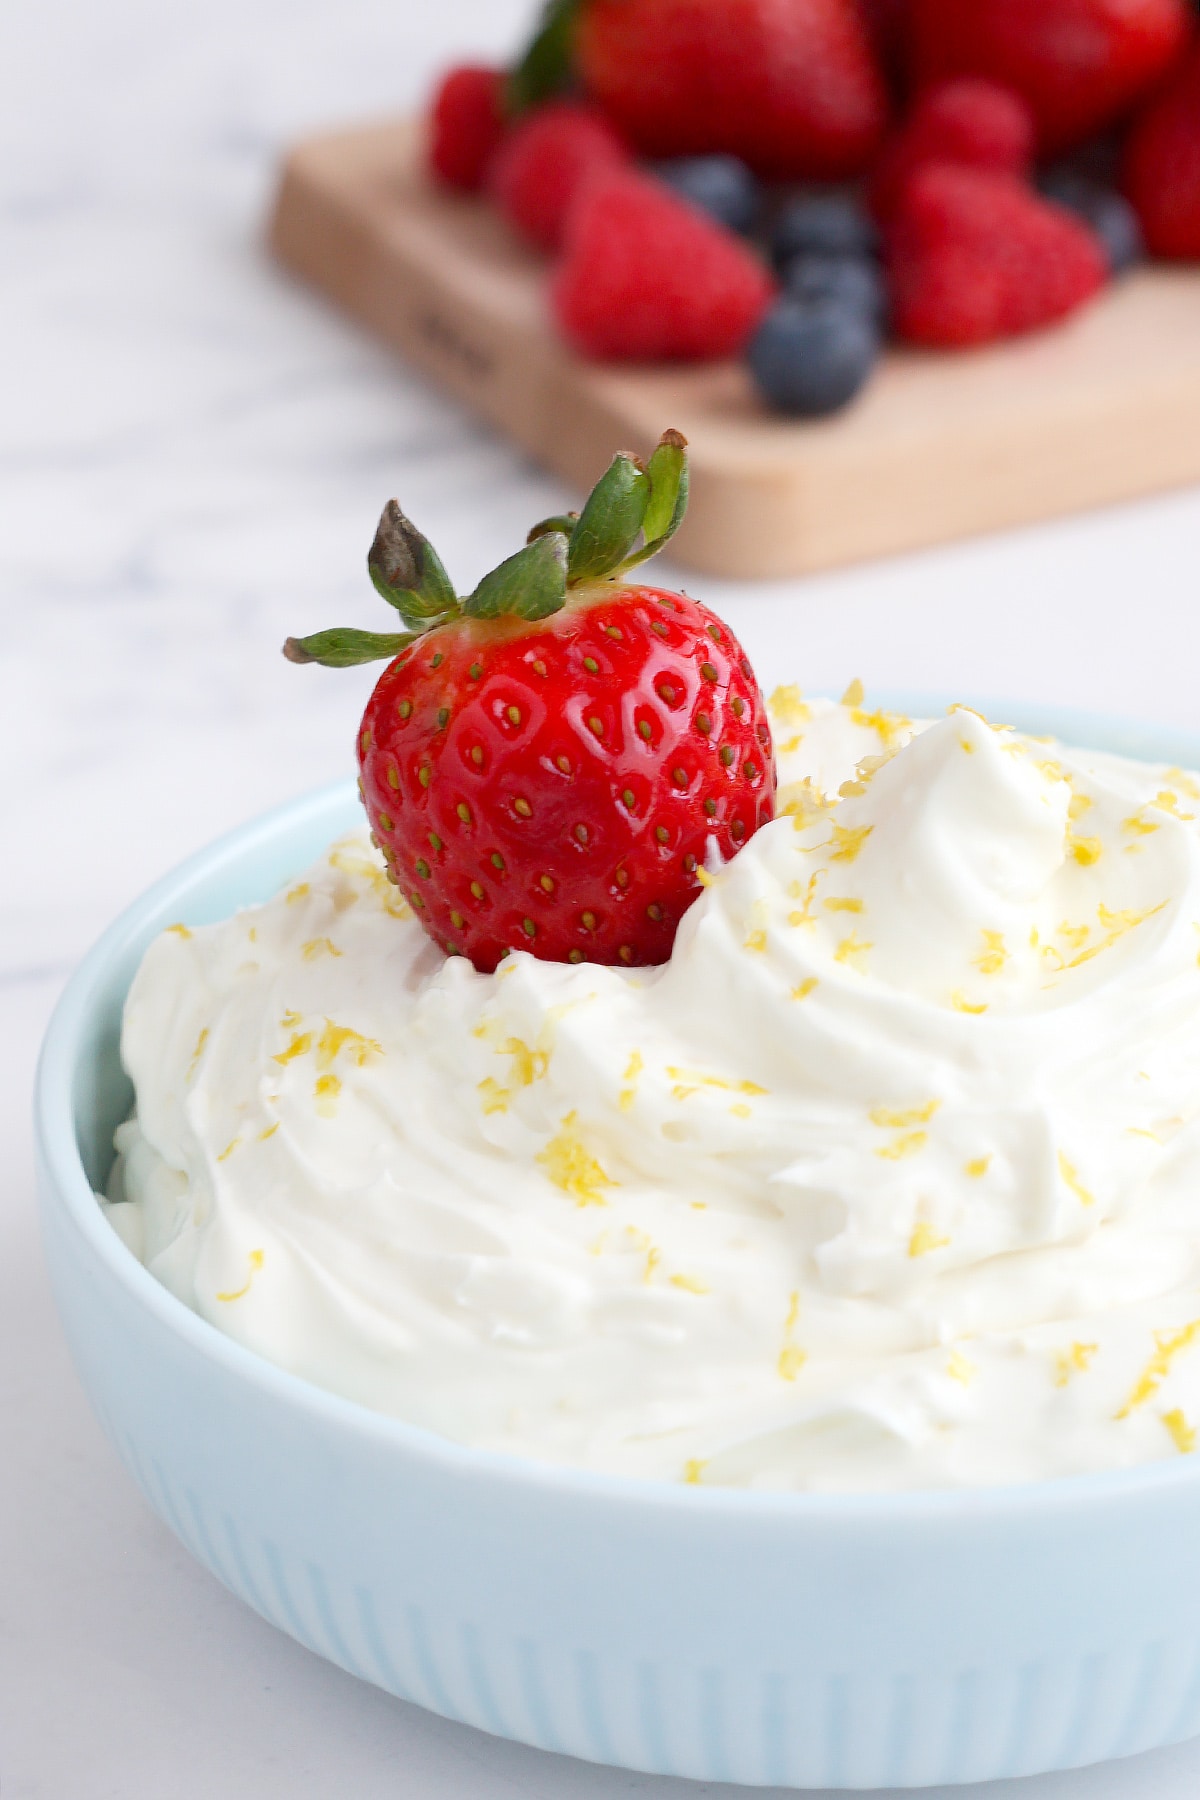 Creamy fruit dip topped with lemon zest and a fresh strawberry in a blue bowl.